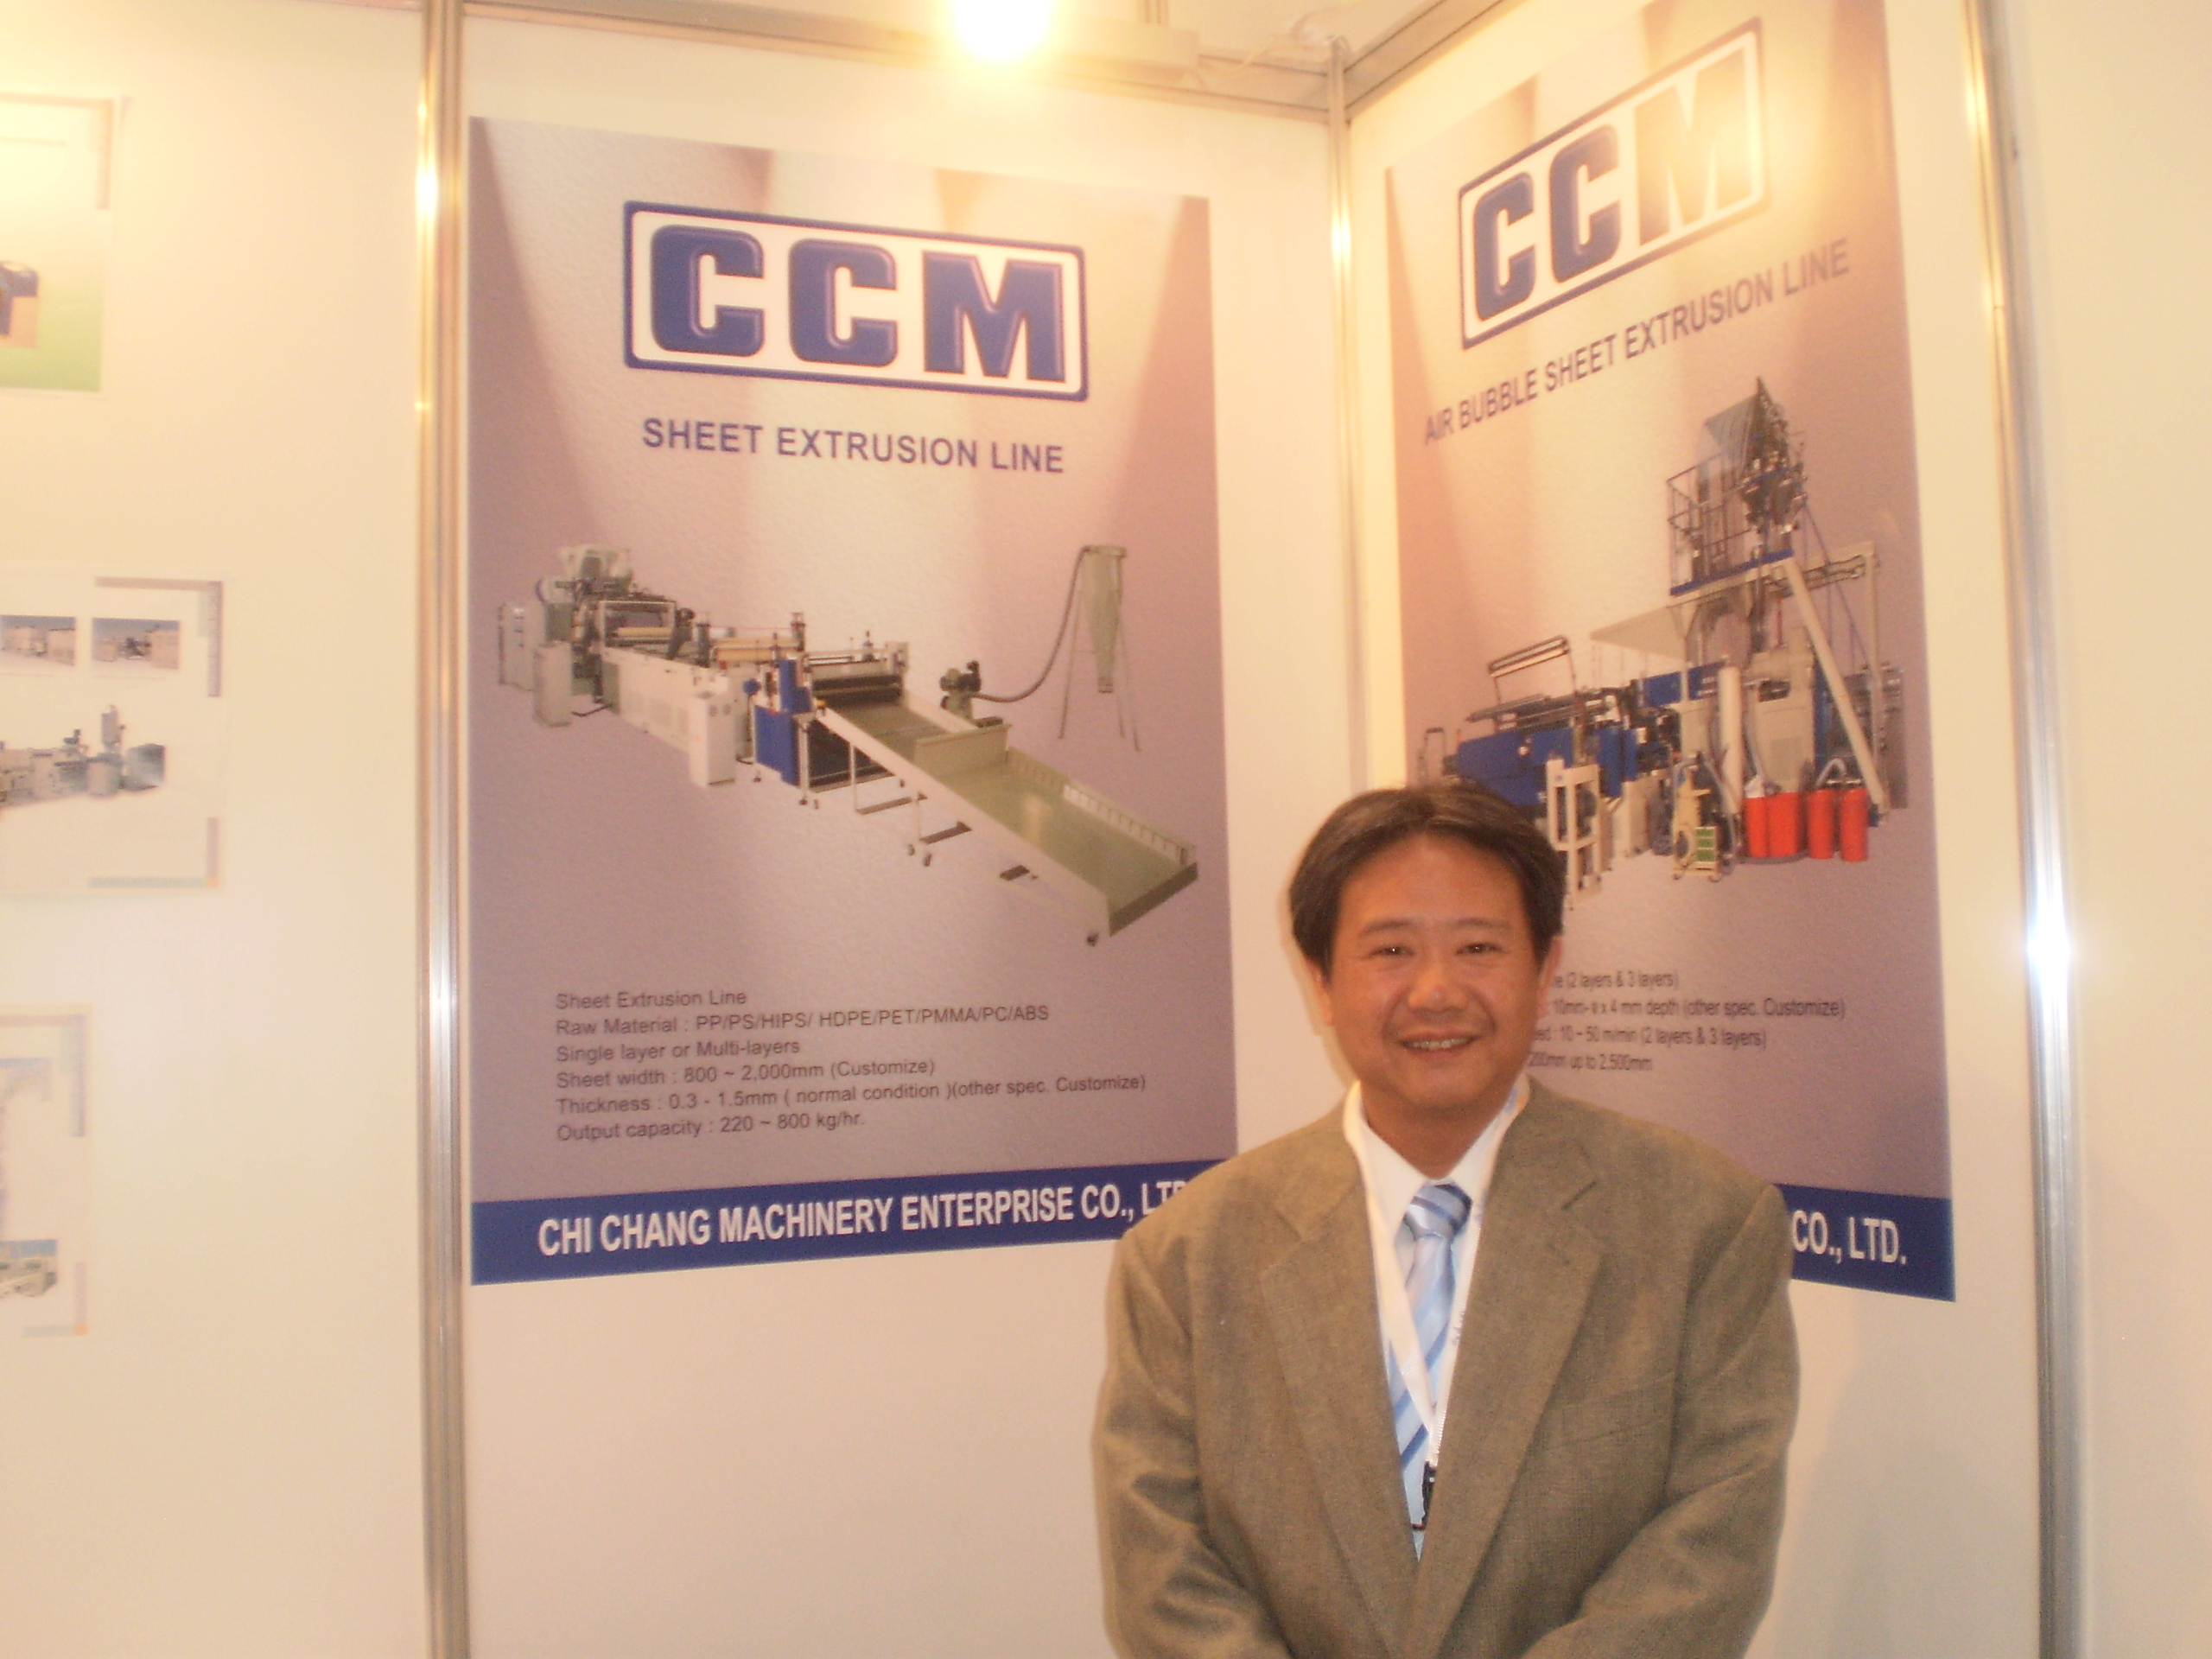 Kevin Lo, a regional manager at Chi Chang, said that his company was one of only a few exhibitors of breathable film extrusion lines at the show.